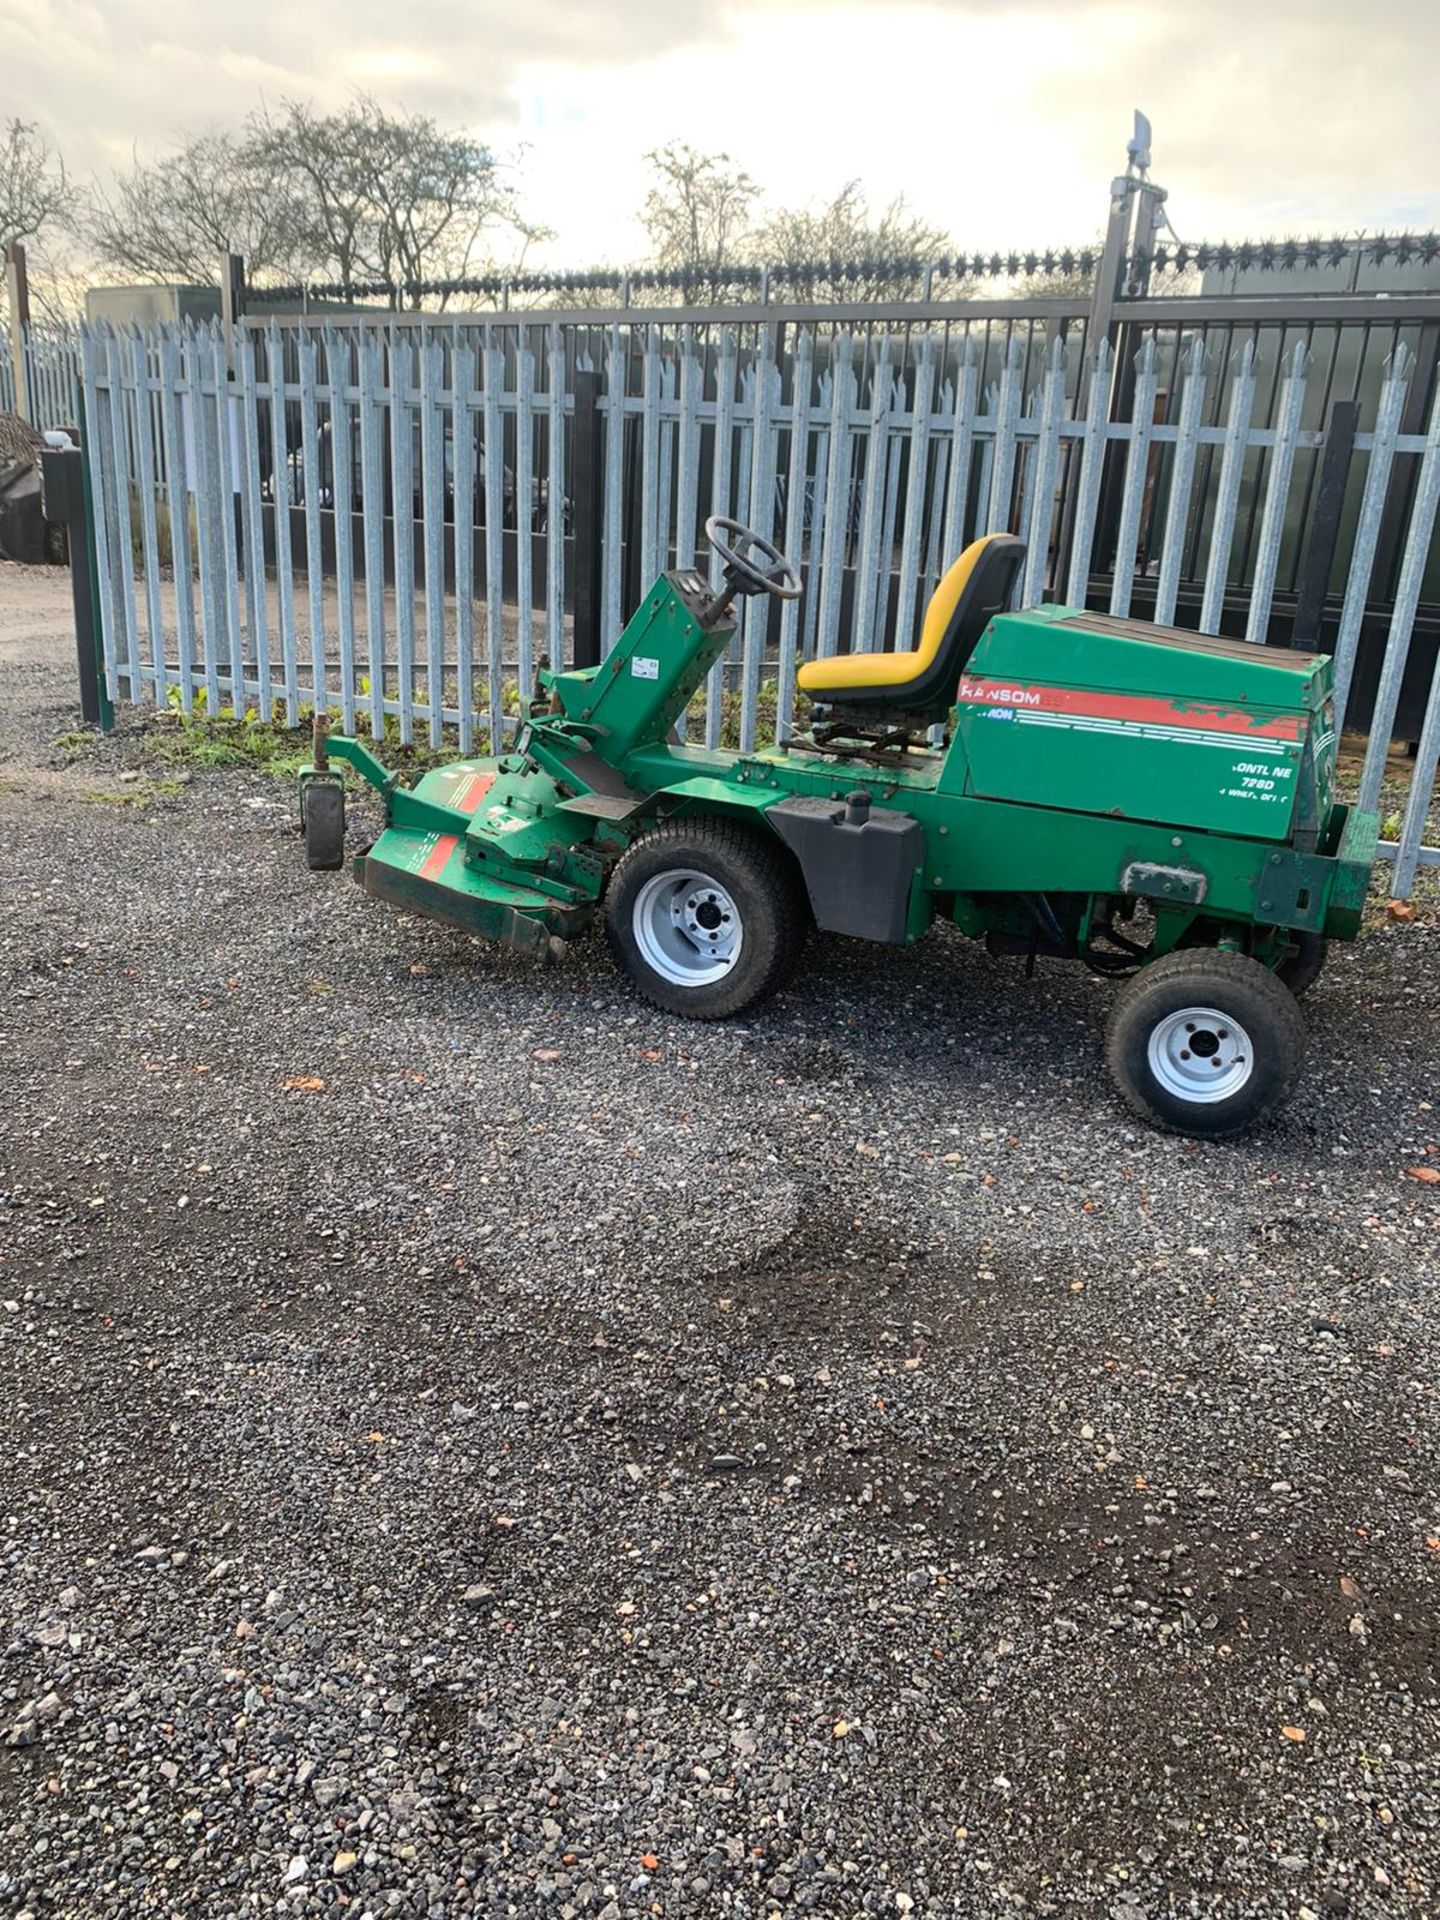 RANSOMES FRONTLINE 728D 4 WHEEL DRIVE DIESEL ROTARY MOWER OUTFRONT DECK 4WD *PLUS VAT* - Image 2 of 10